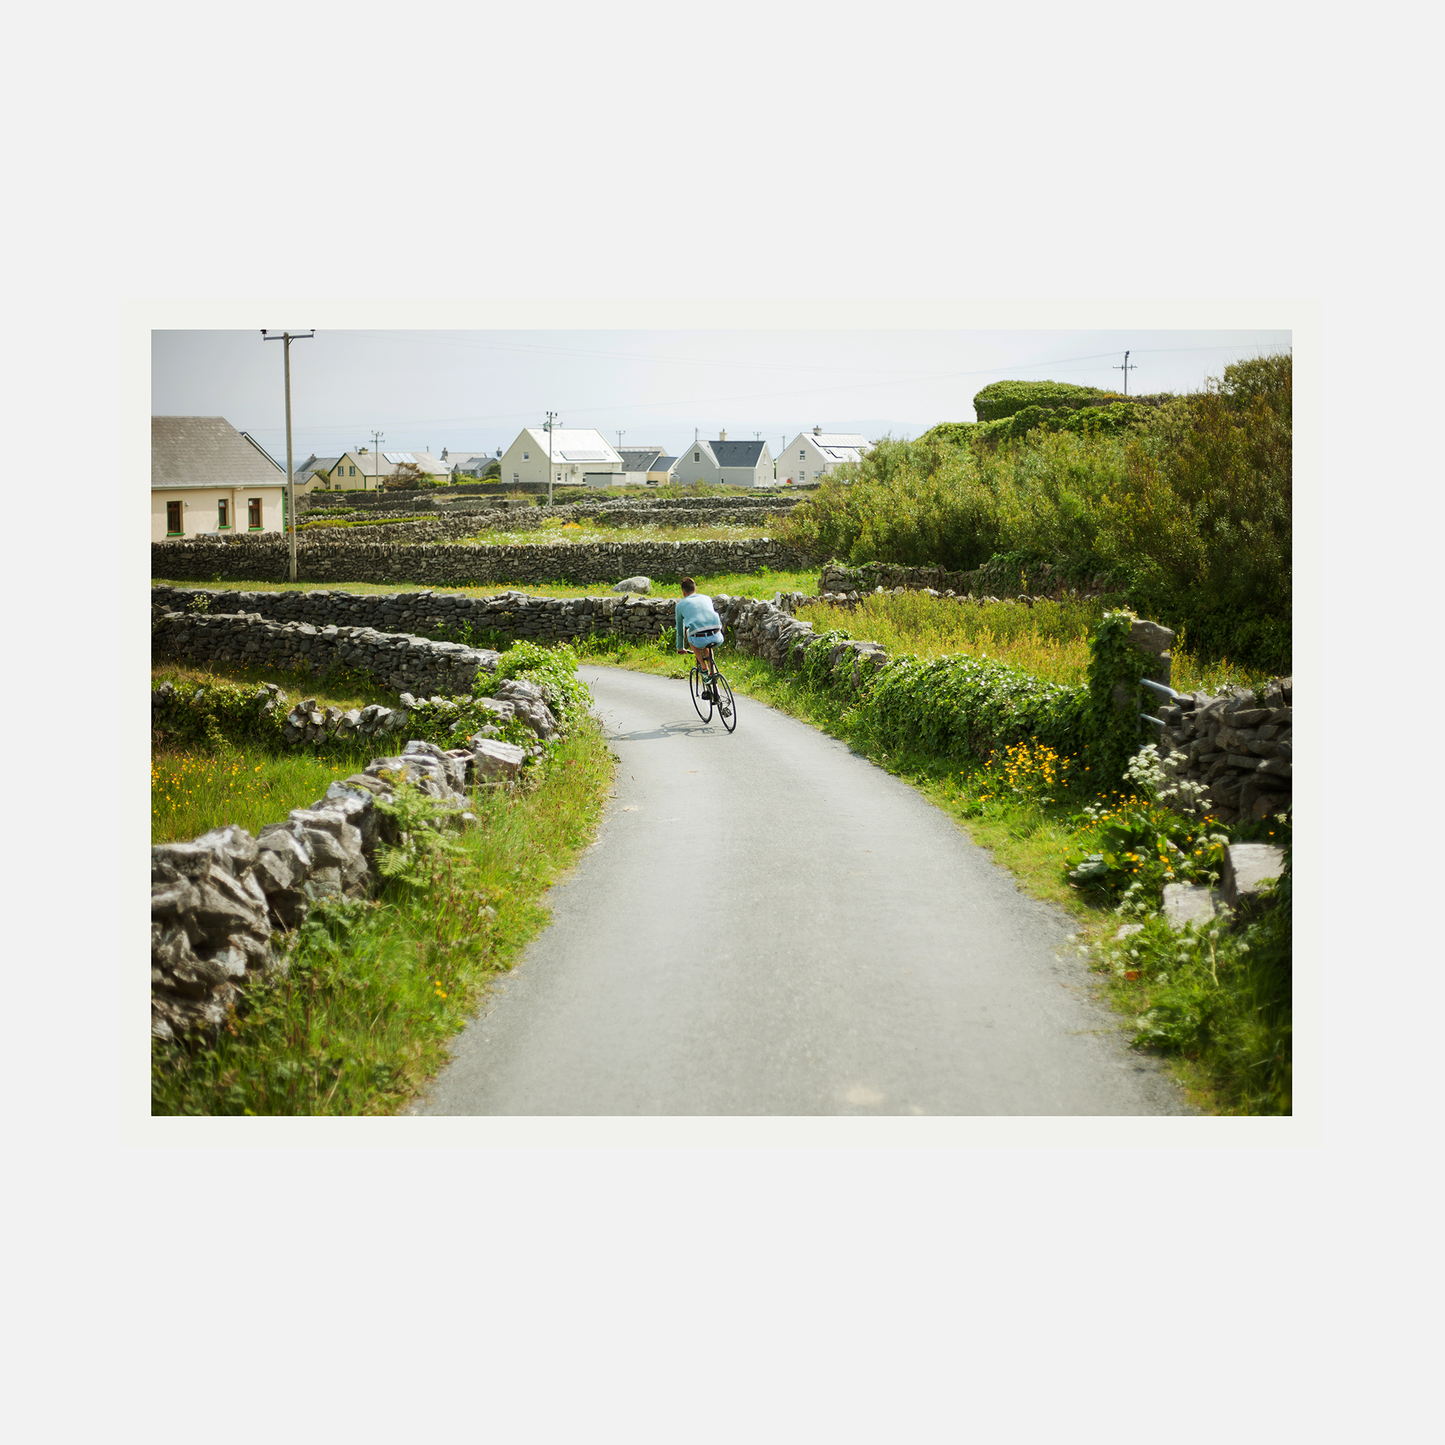 Inis Oirr by Donal Talbot